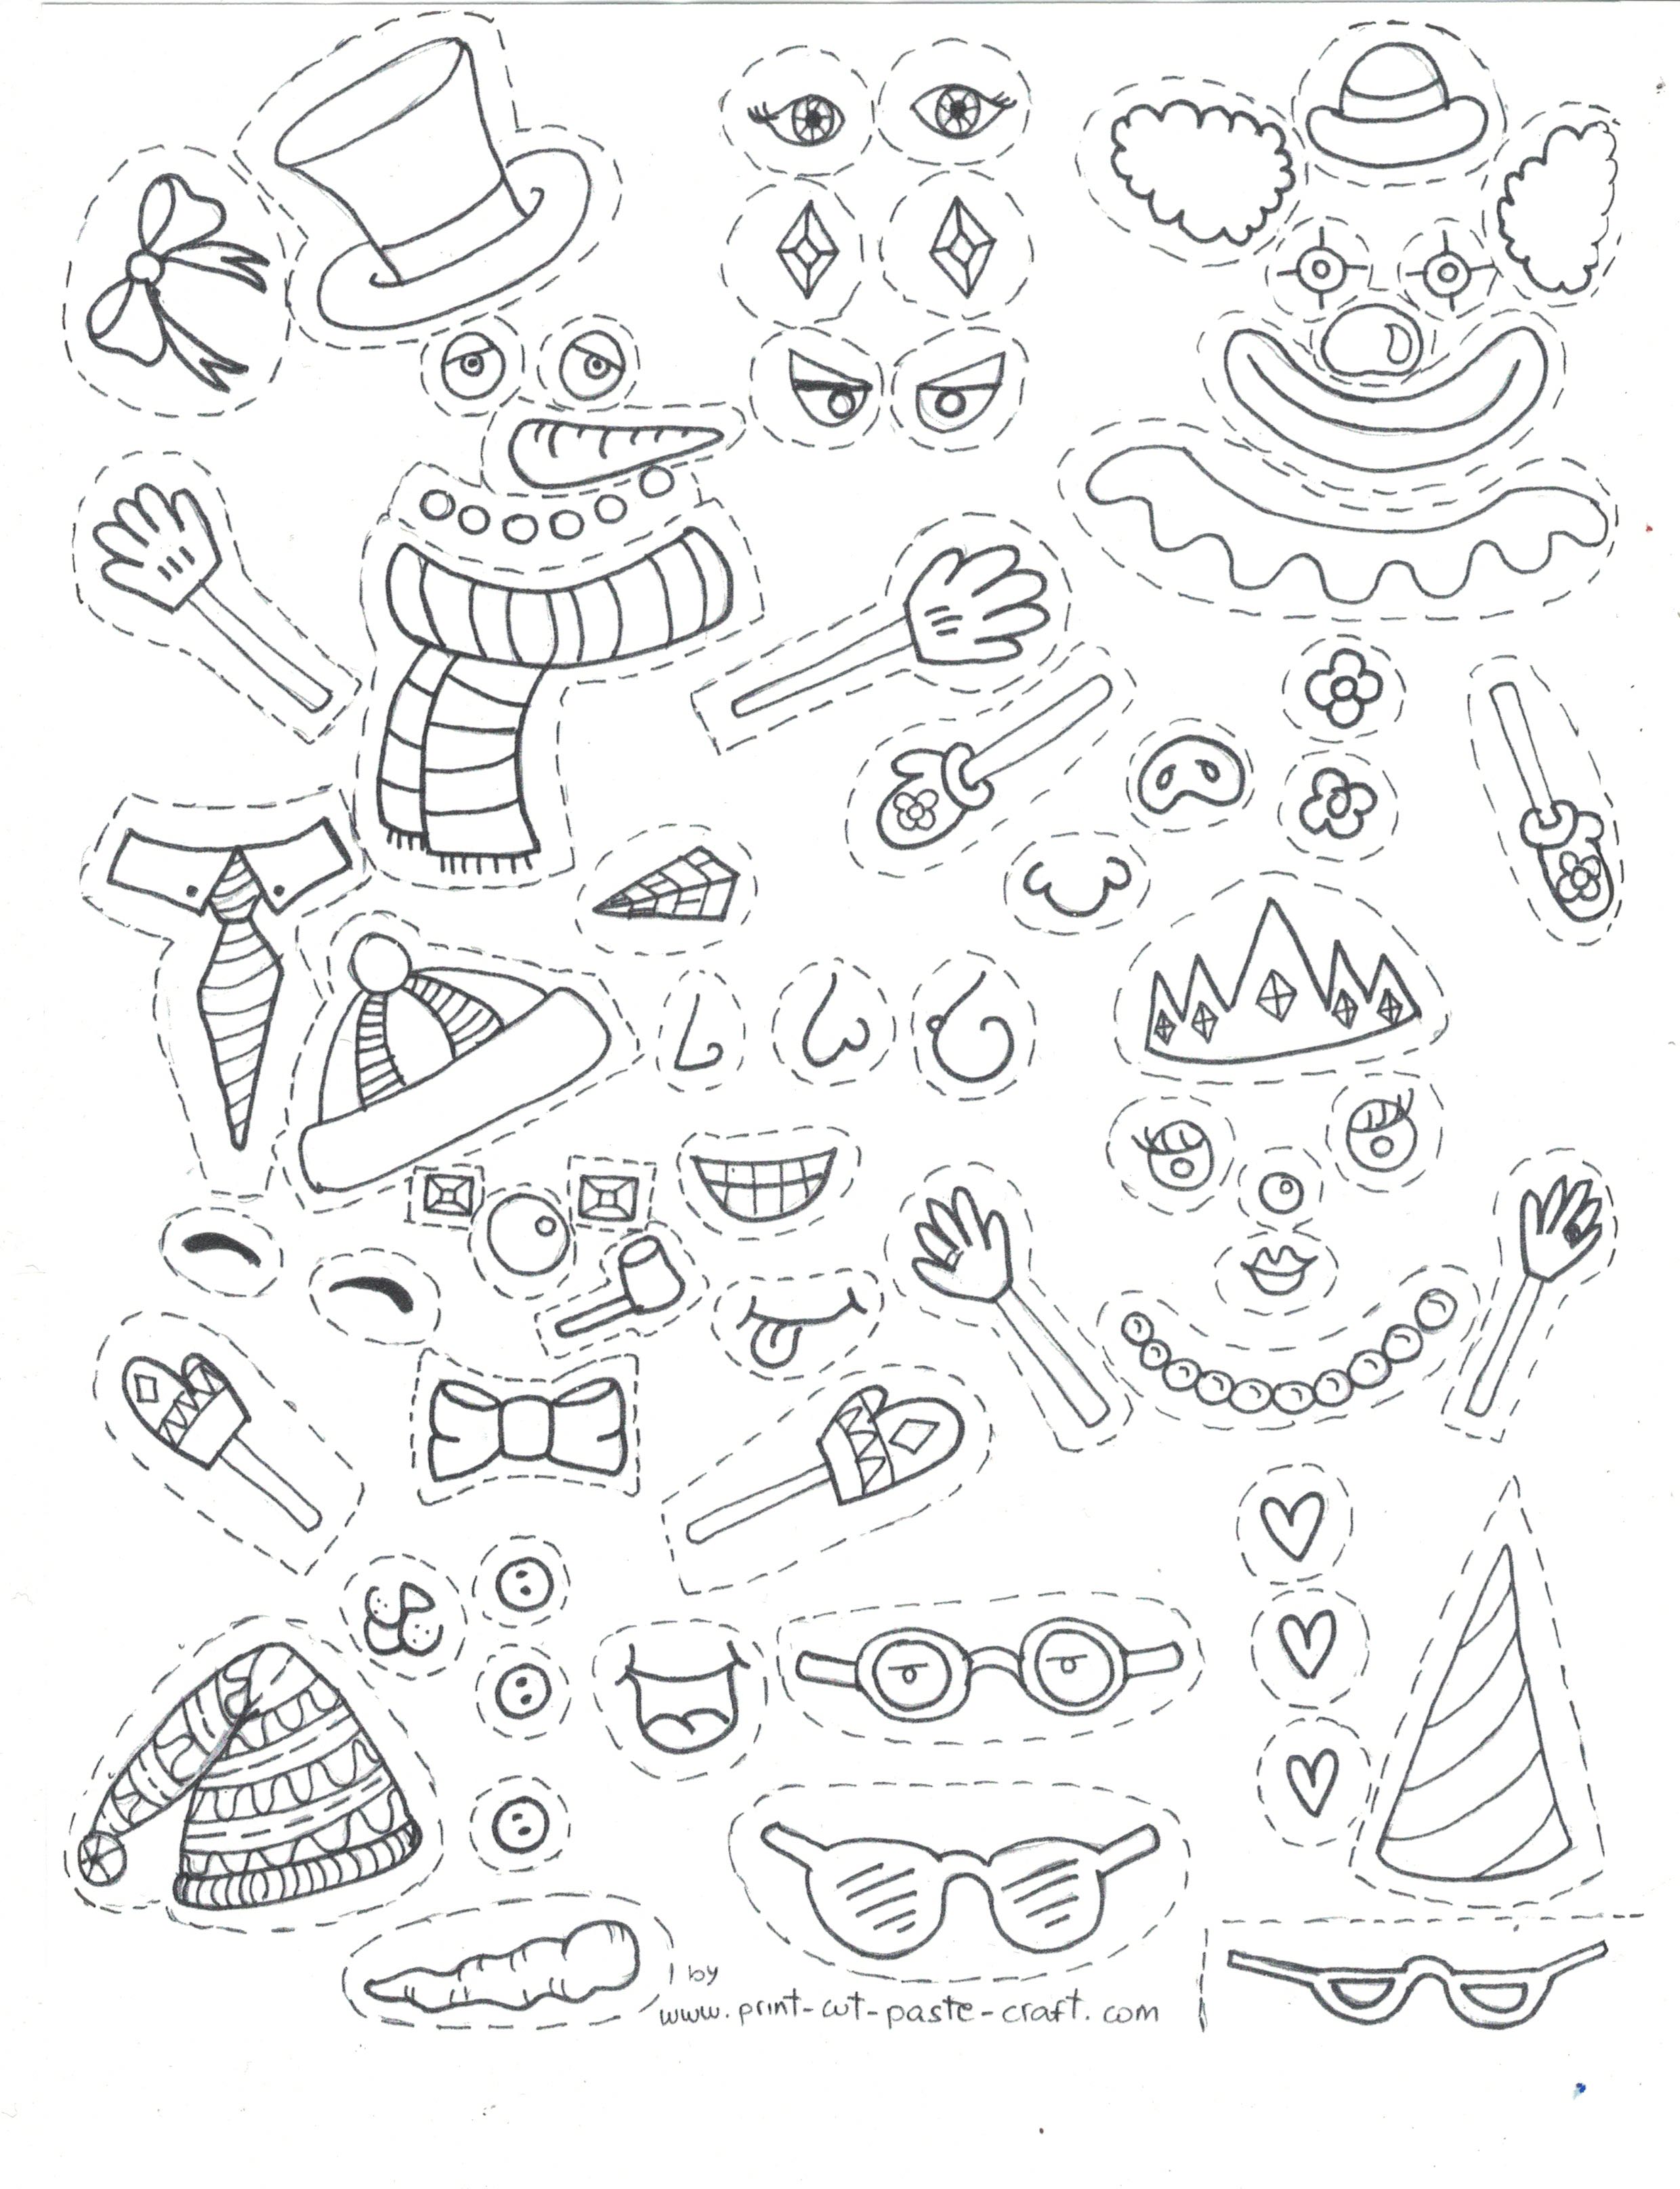 coloring-pages-print-cut-paste-craft